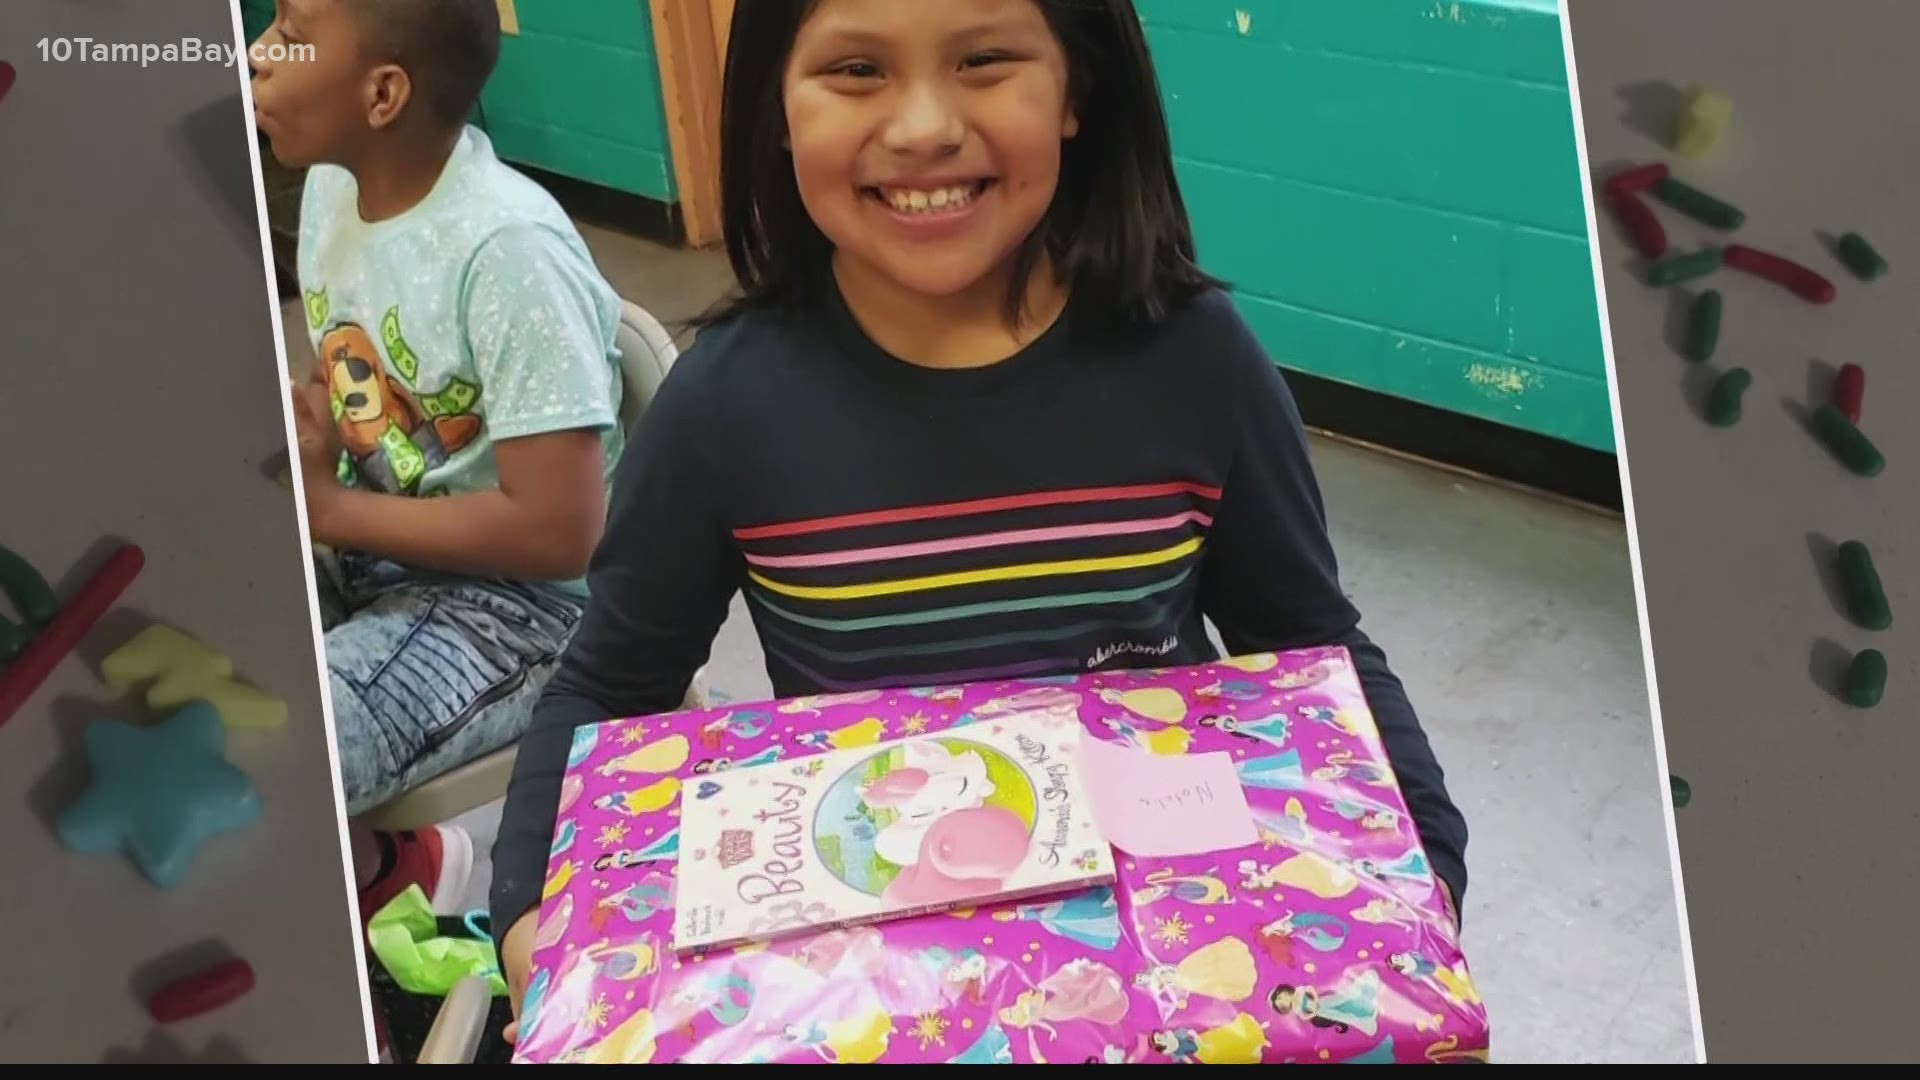 Two nurses felt a calling to help kids in their community. Belinda Leto and Celina Saunders set out to provide birthday for kids who otherwise may not receive one.